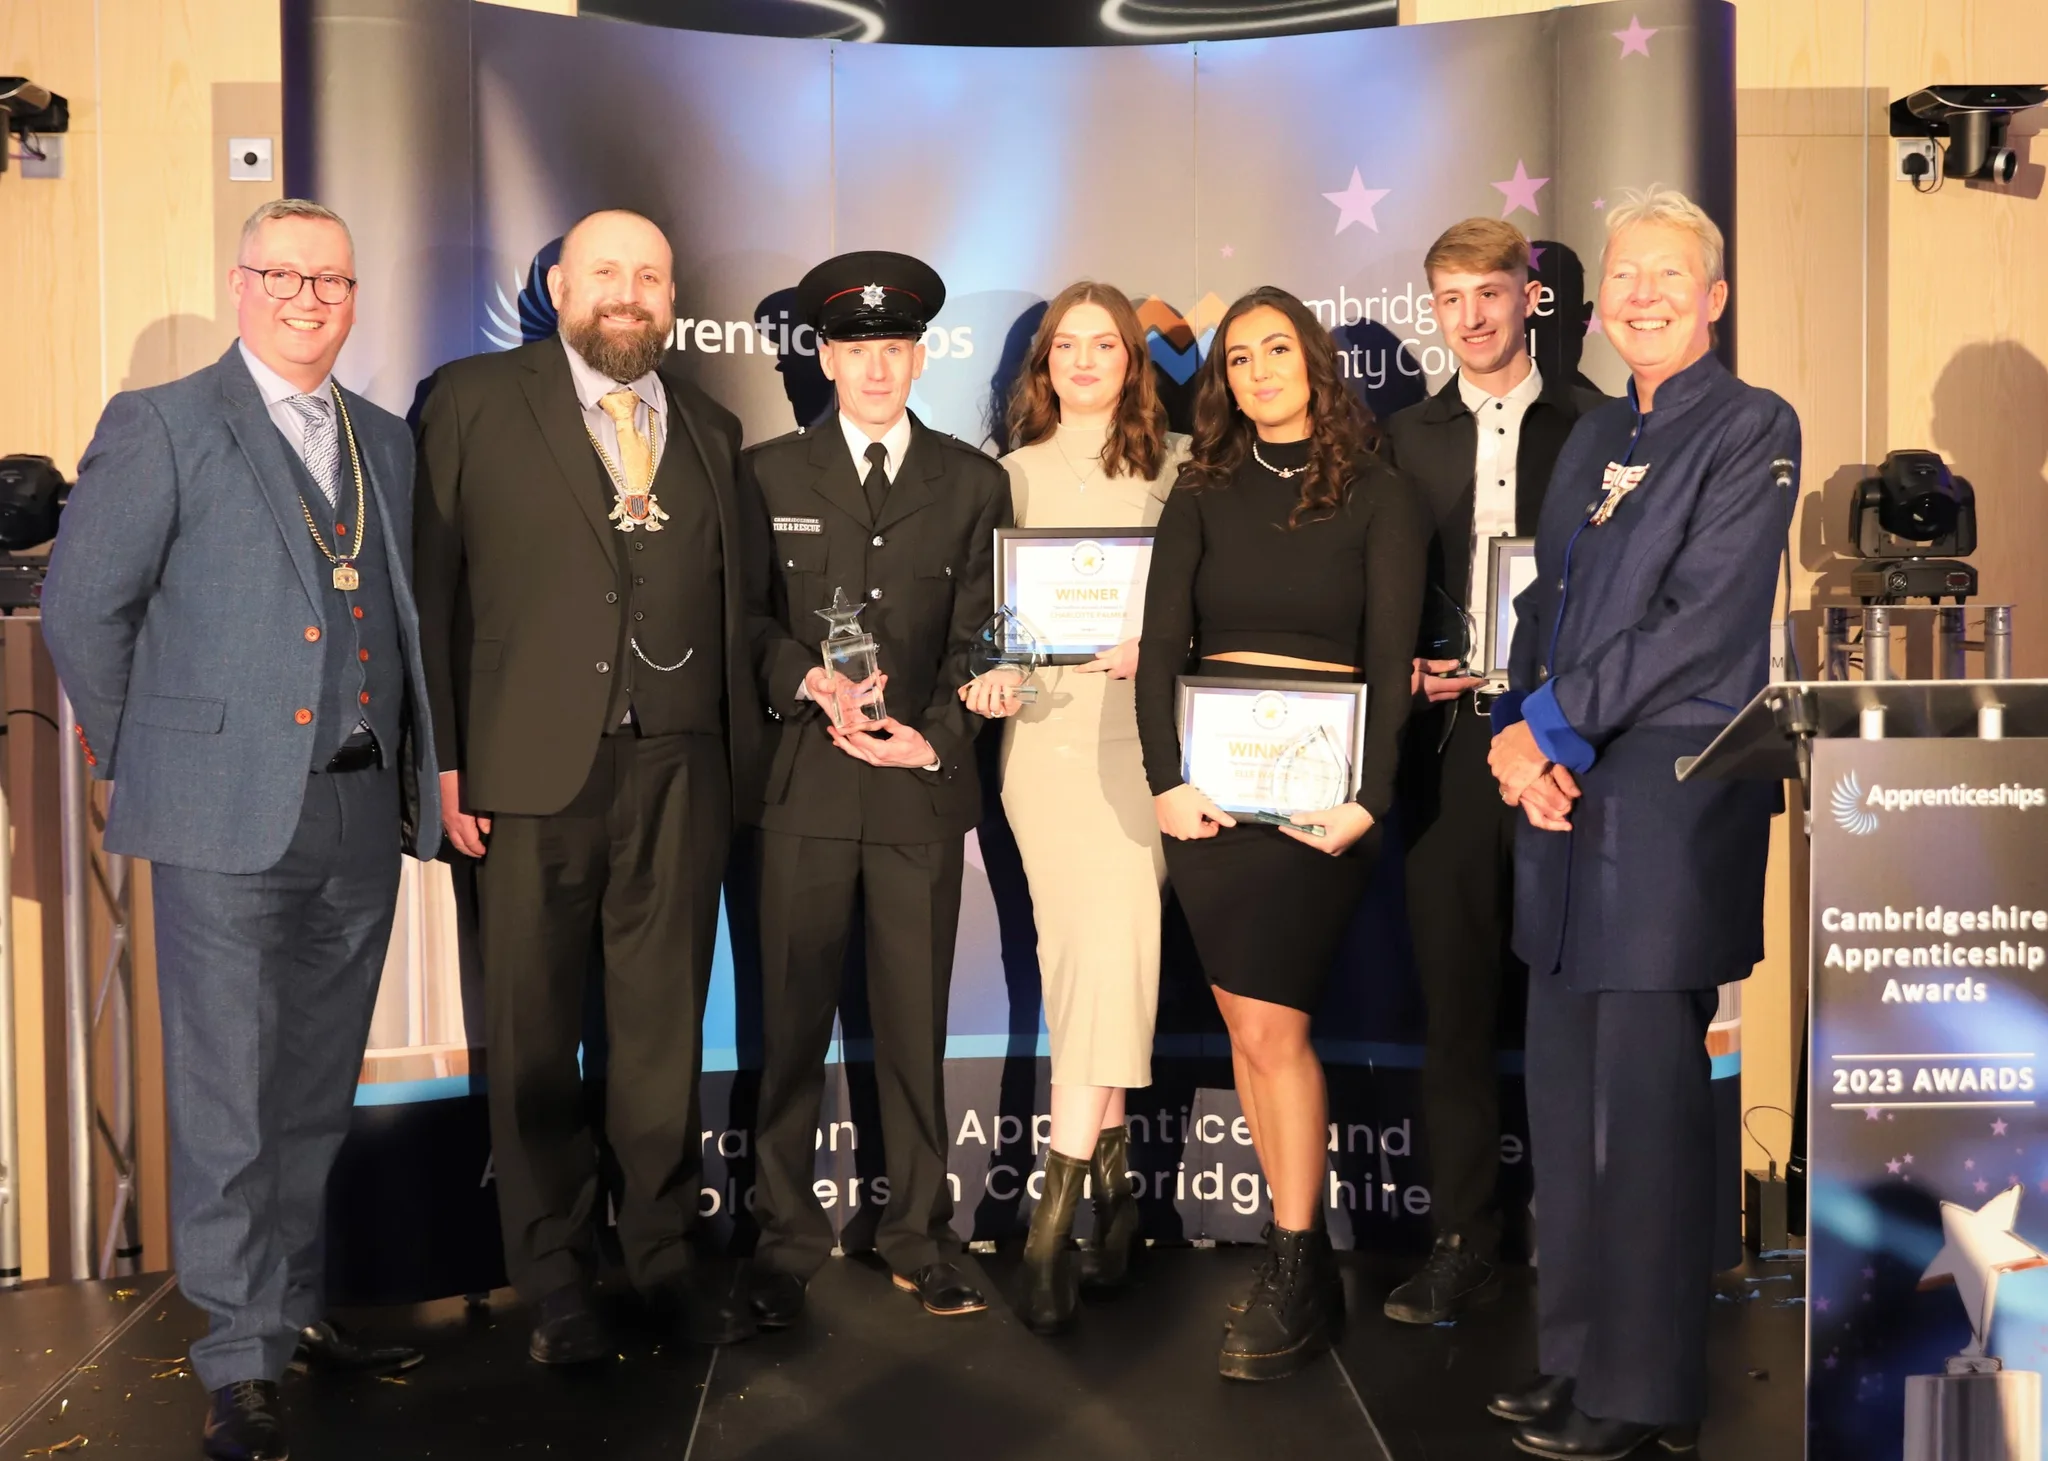 The awards ceremony took place during National Apprenticeship Week. It provided an opportunity to spotlight how apprenticeships provide ‘Skills for Life’